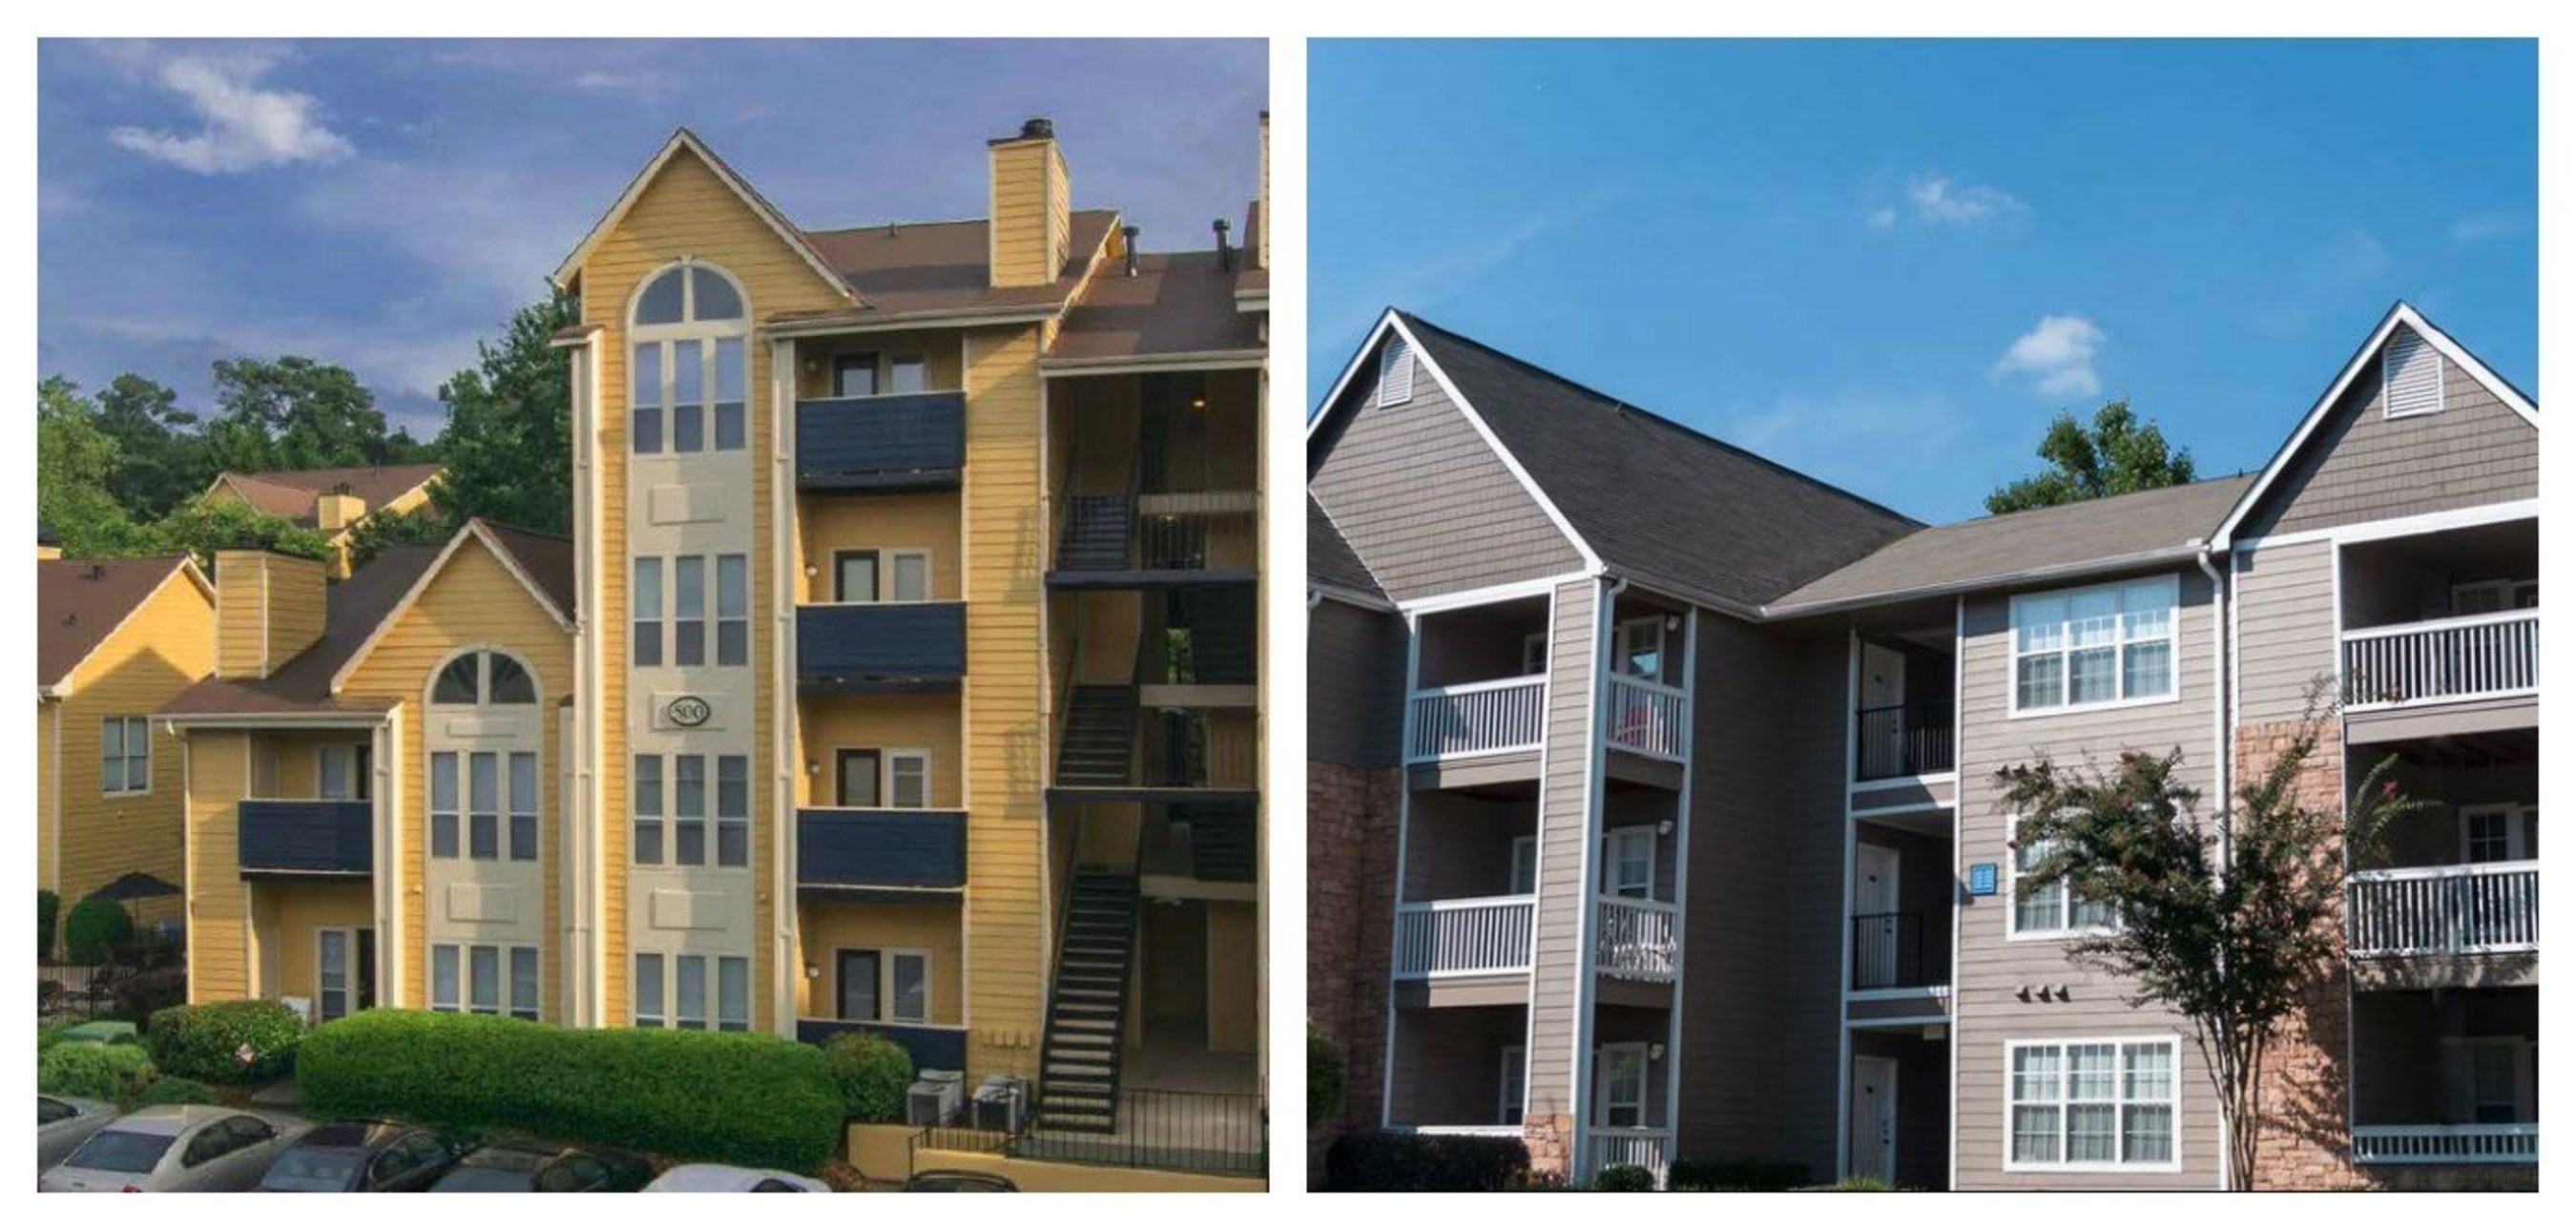 On behalf of our managed REIT, CPA:18 - Global, W. P. Carey has acquired a 97% interest in two income-generating multifamily properties in Georgia: Dupont Place Apartments, a 217-unit property located in Tucker and Gentry's Walk, a 227-unit property in Chamblee.